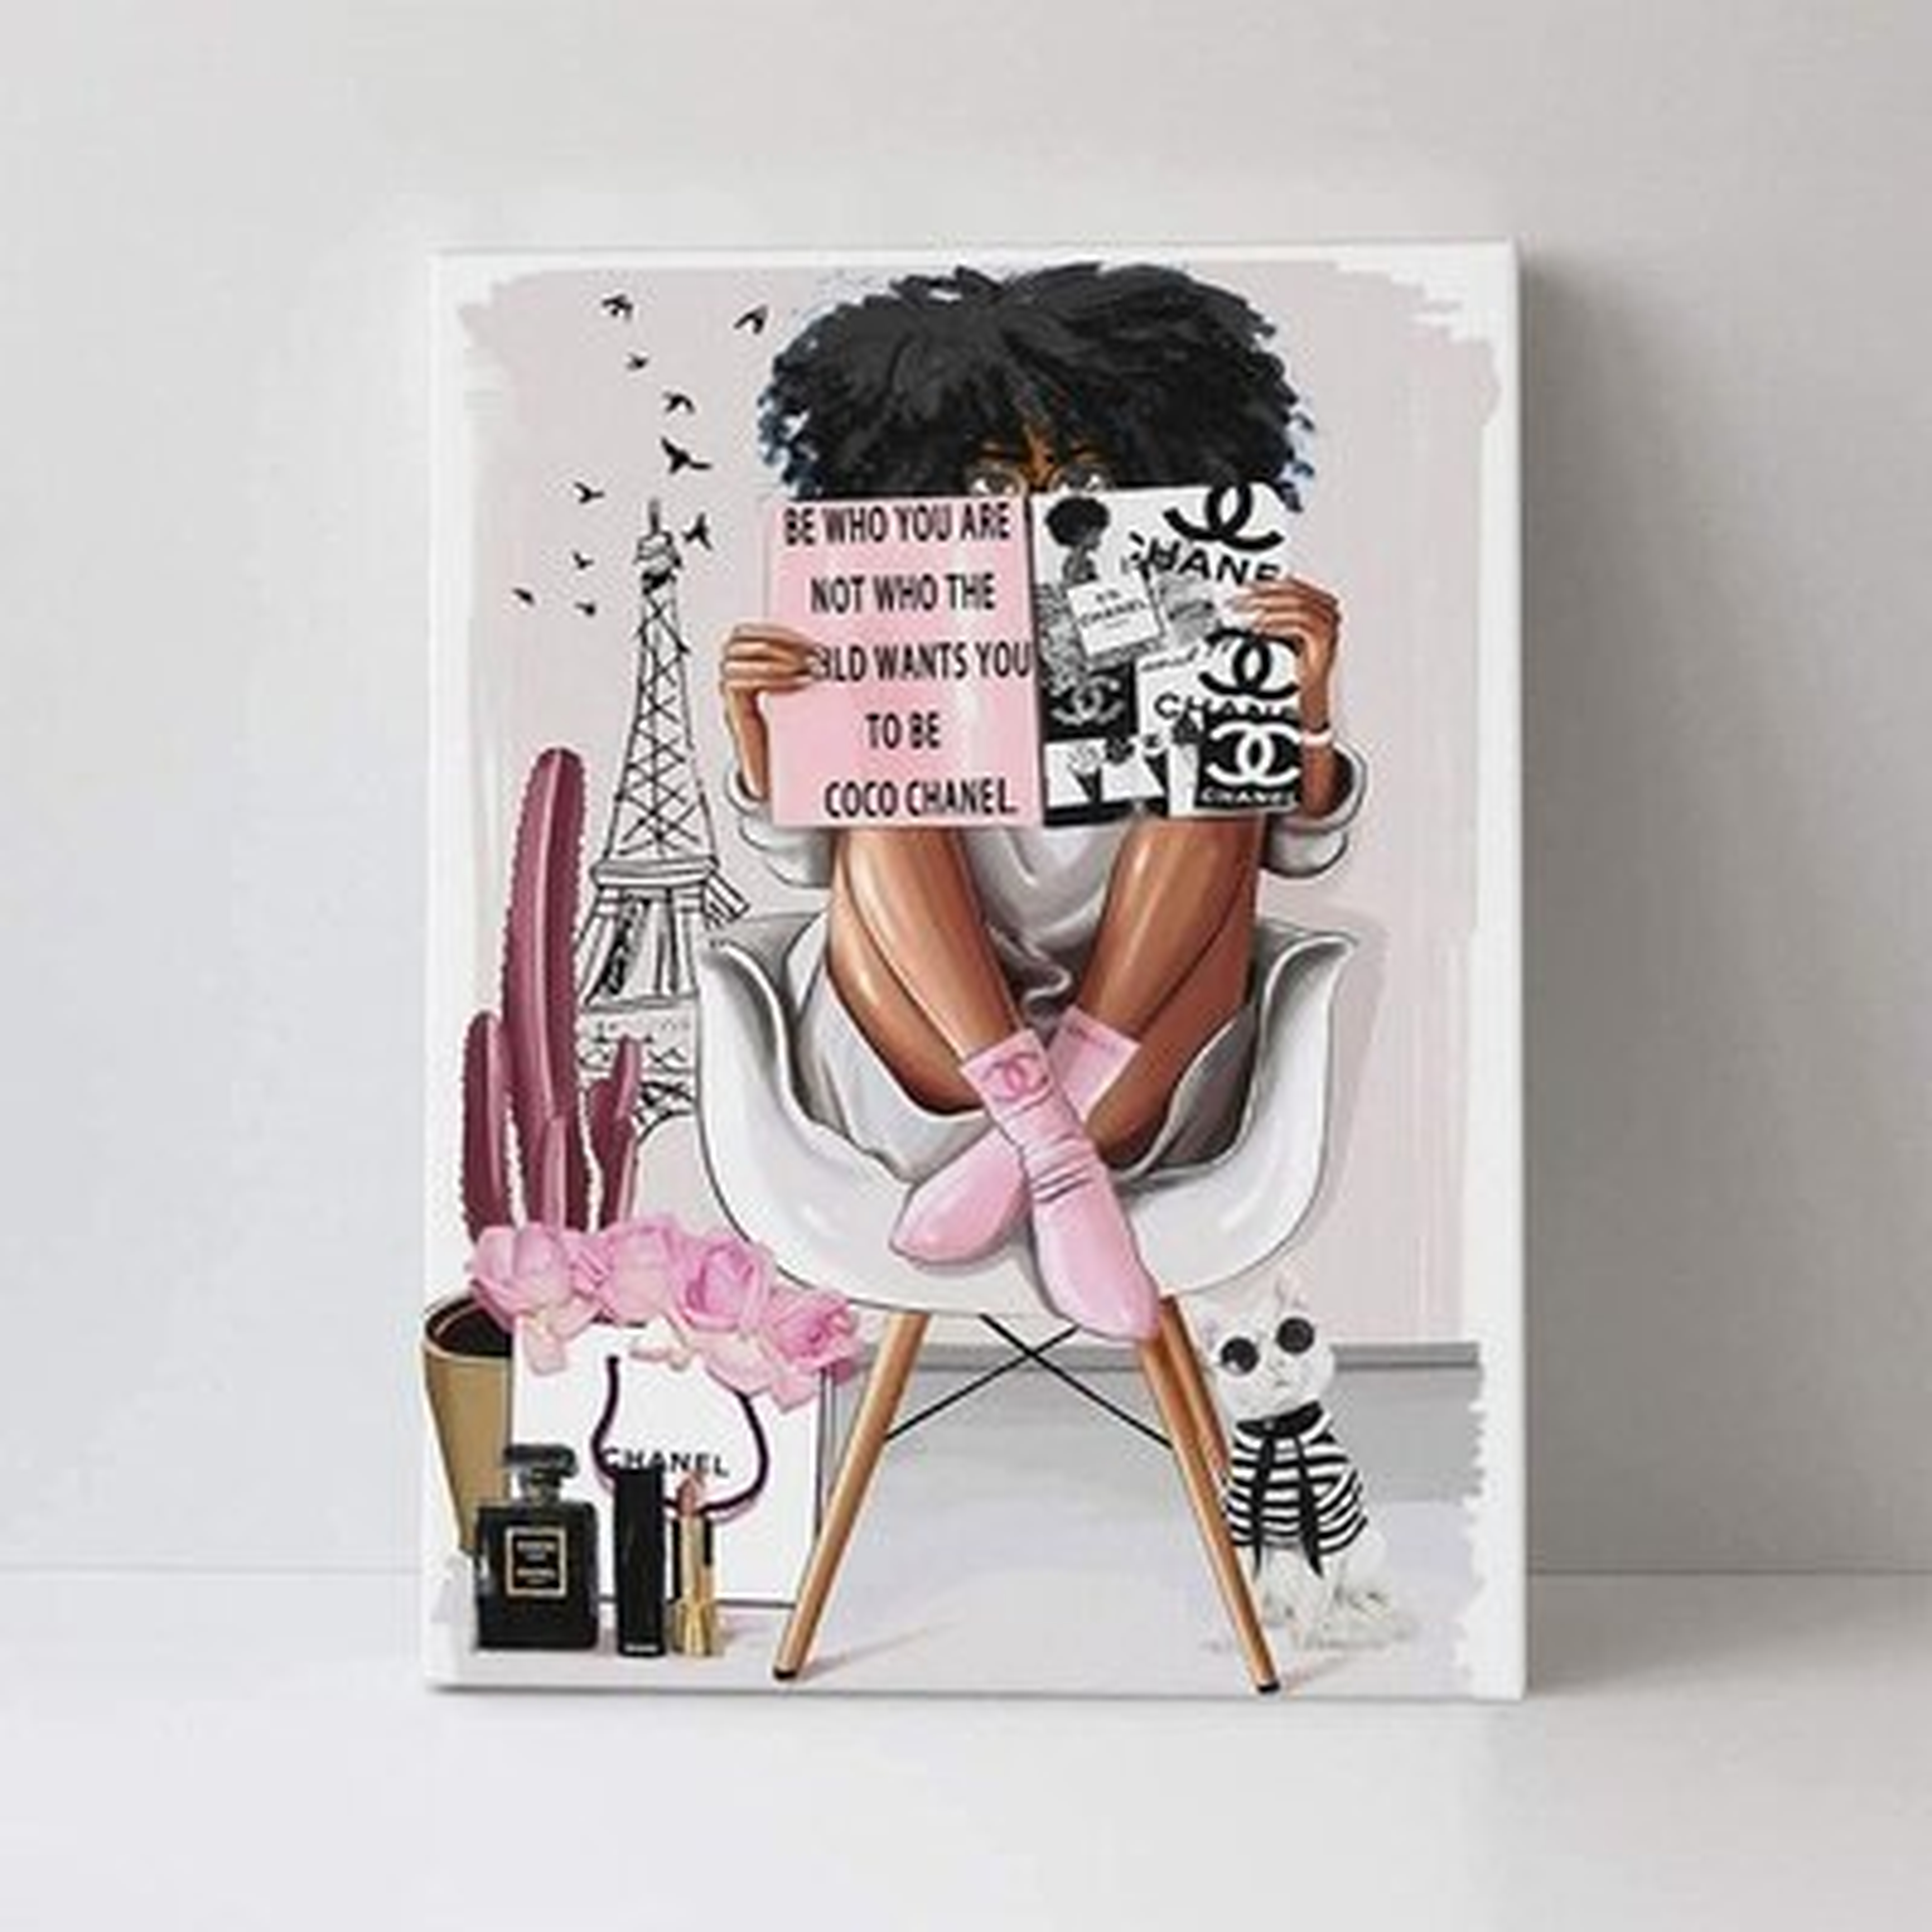 African American Wall Art Fashion Black Woman Queen Painting Home Decor For Bedroom Living Room Black Wall Art Woman Gifts Framed Ready To Hang12x16inch - Wayfair